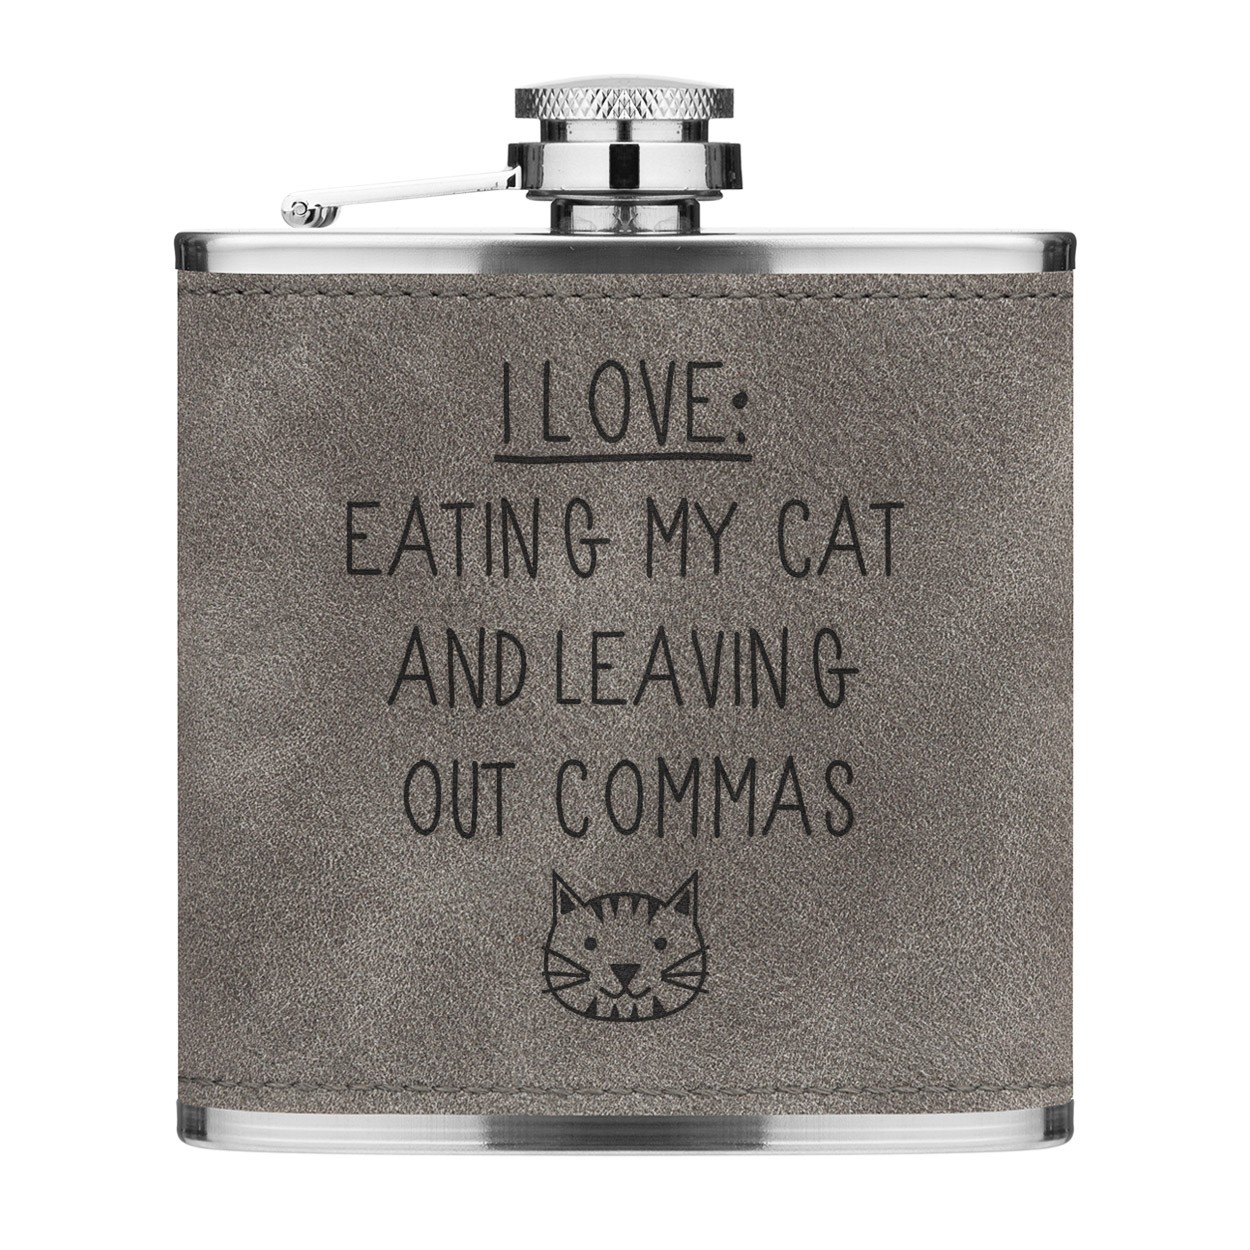 I Love Eating My Cat and Leaving Out Commas 6oz PU Leather Hip Flask Grey Luxe